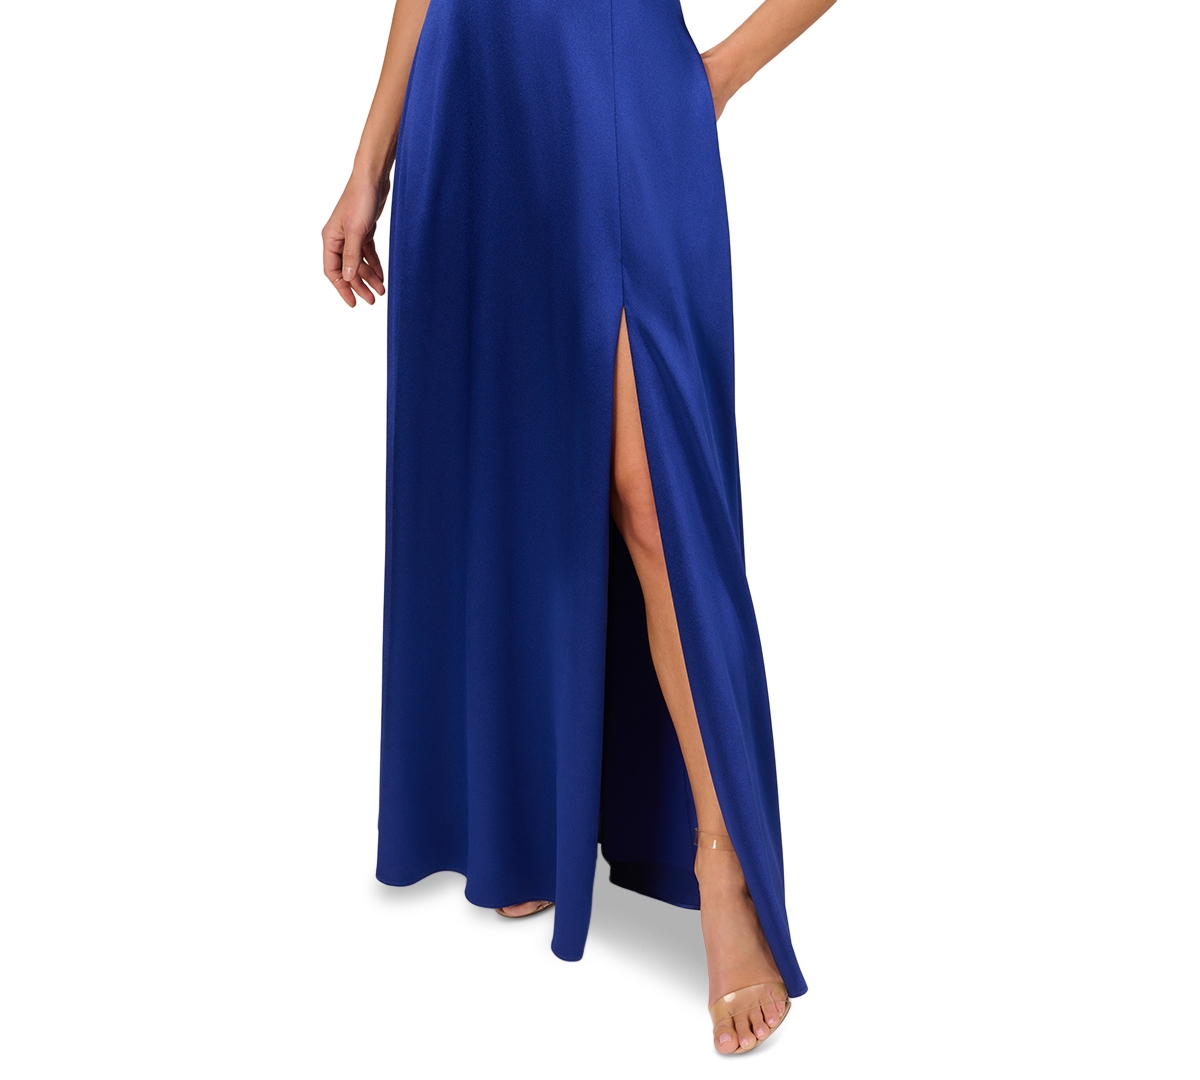 Shop Adrianna By Adrianna Papell Women's Satin Corset Maxi Dress In Royal Sapphire